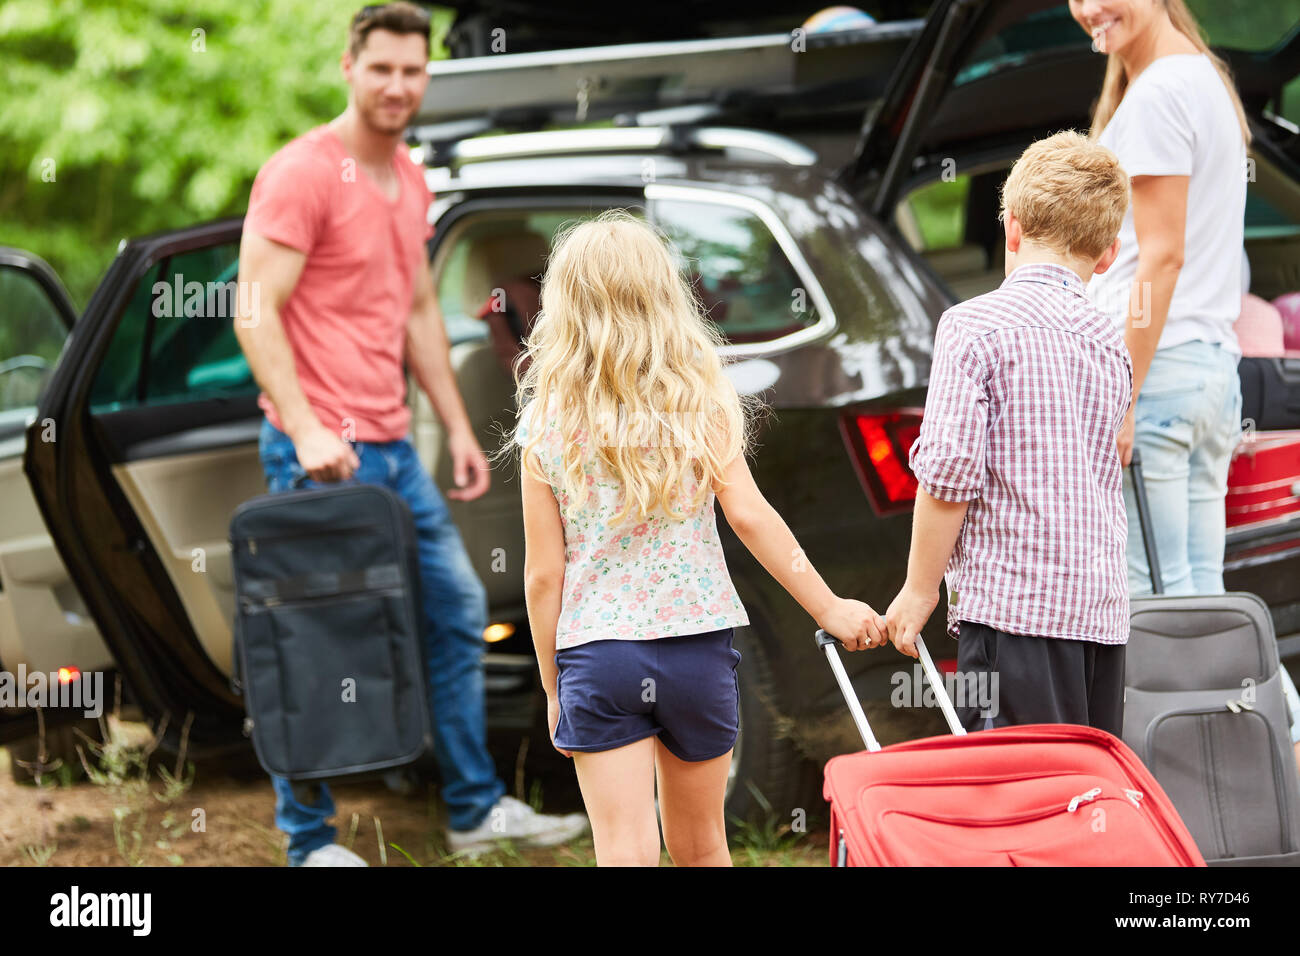 Family at the car packing at the suitcase before traveling on vacation Stock Photo